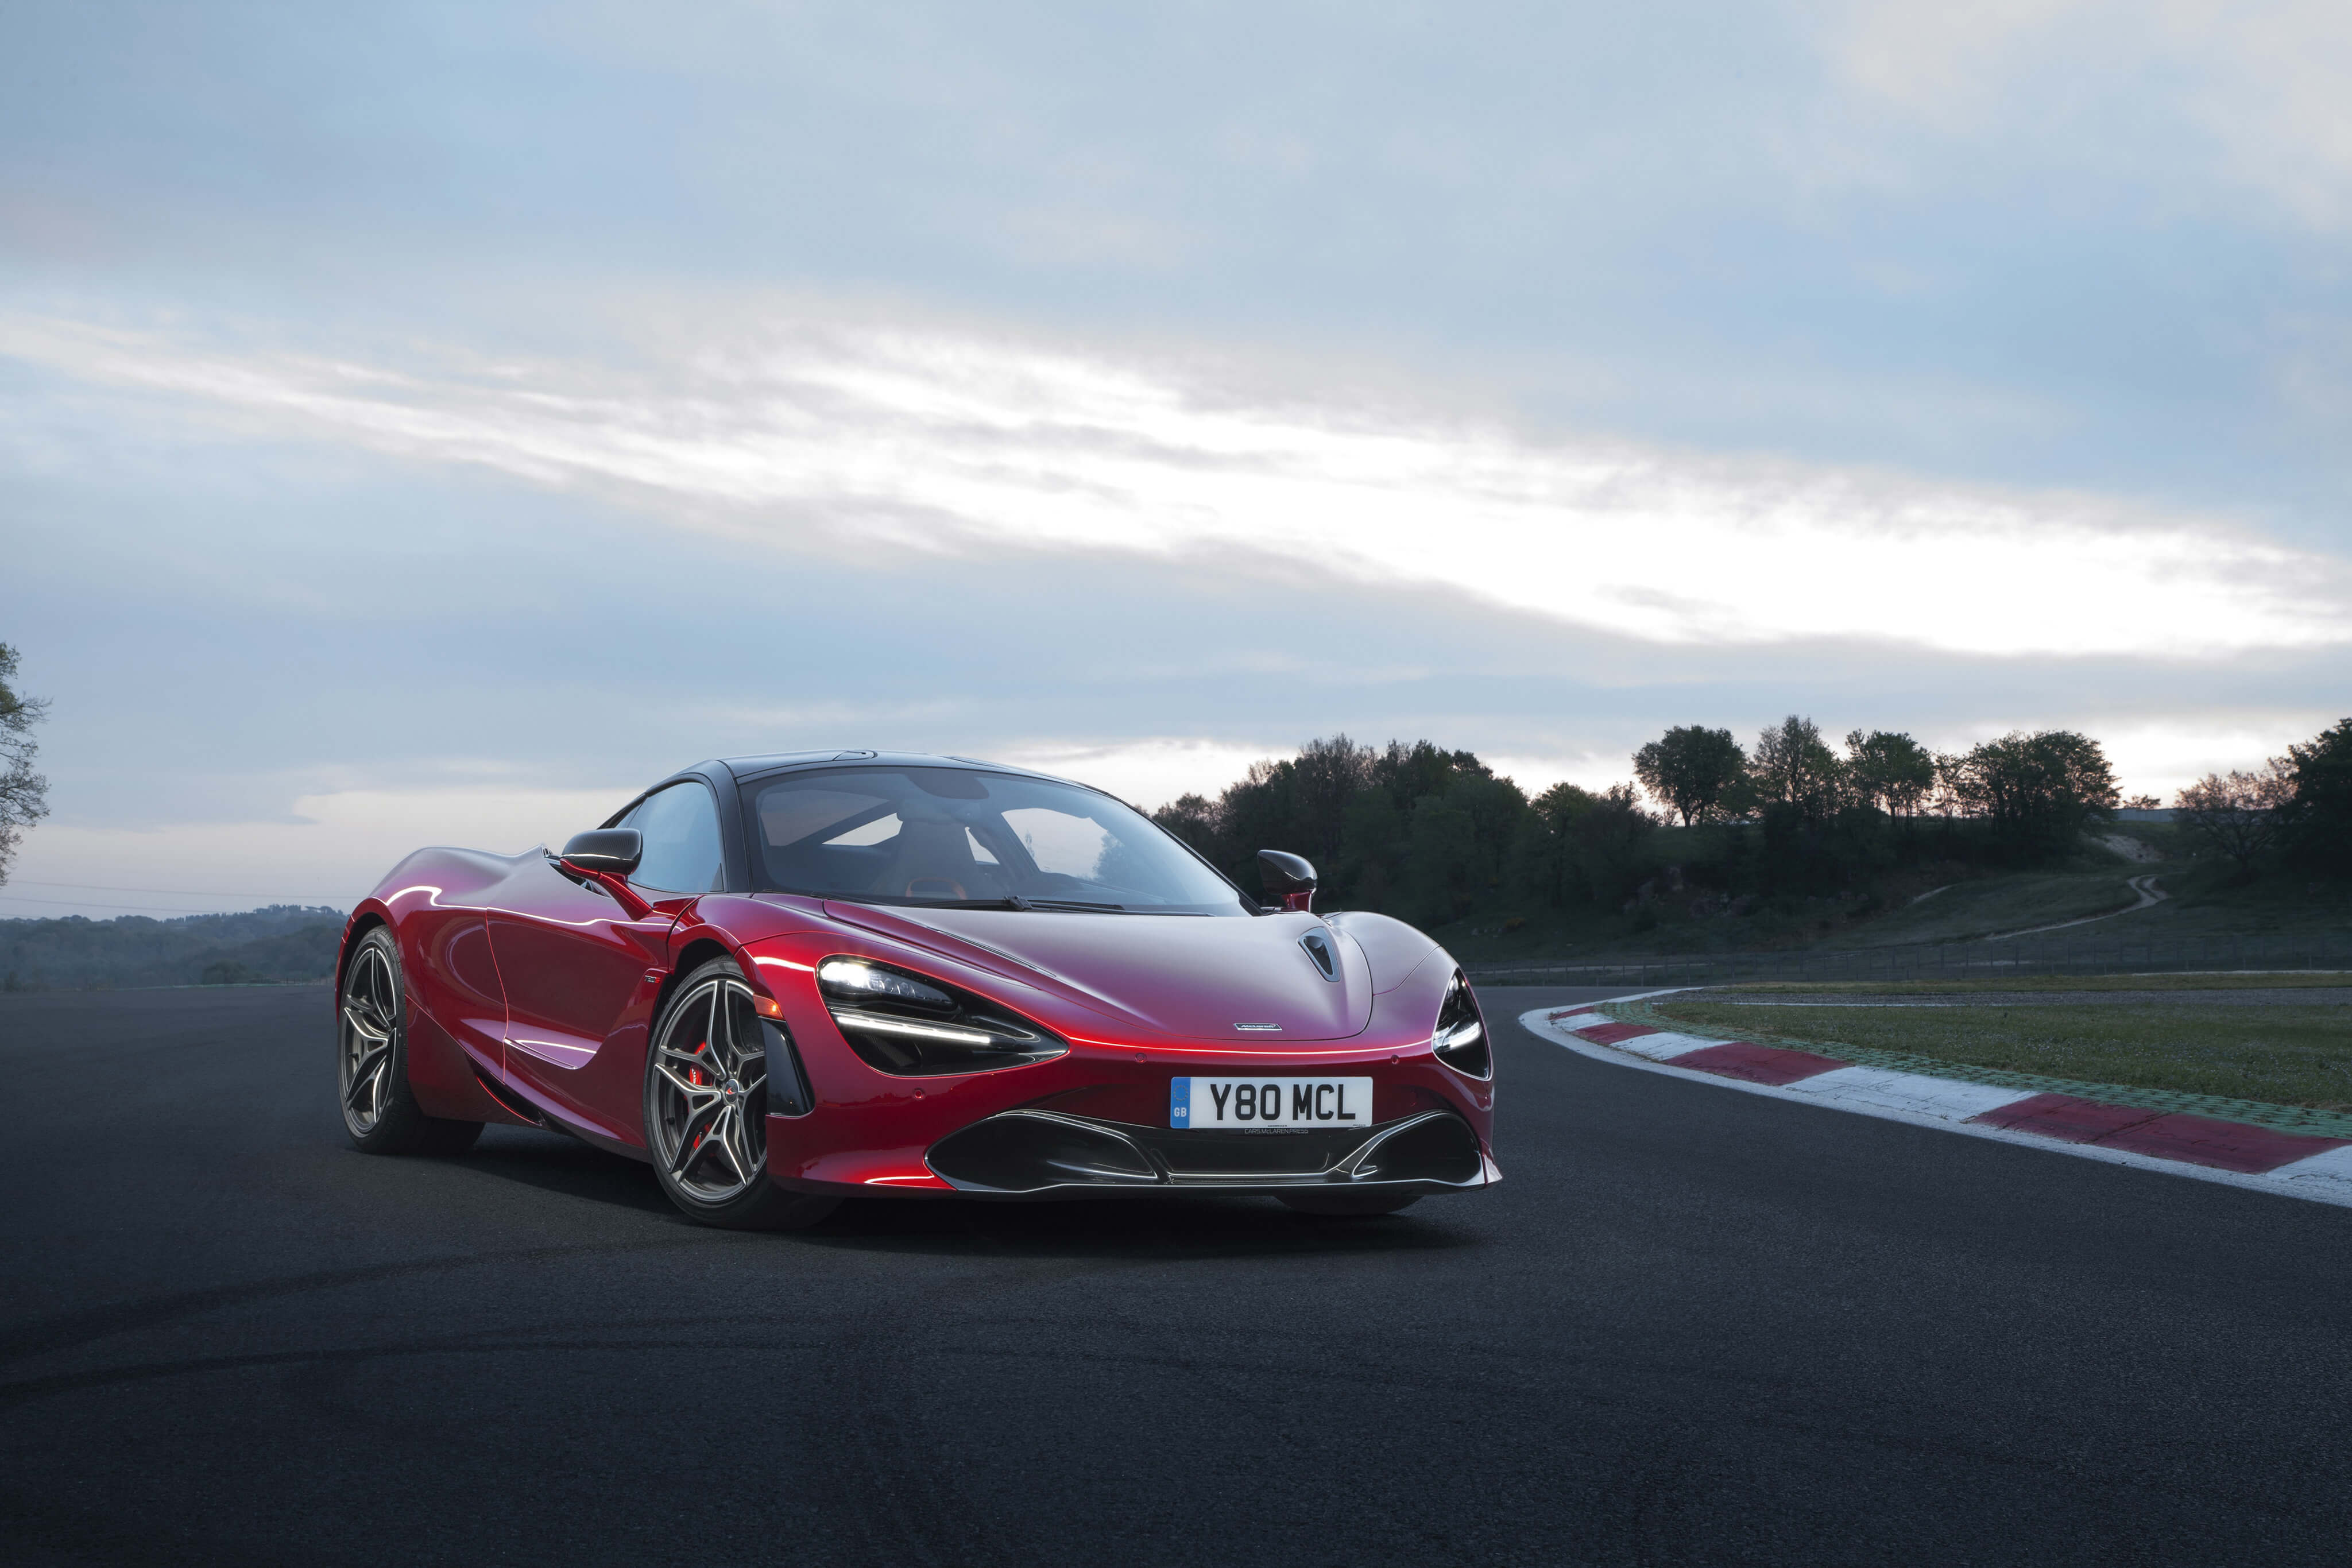 Red McLaren 720s Car on Track Wallpaper 66189 4096x2731px